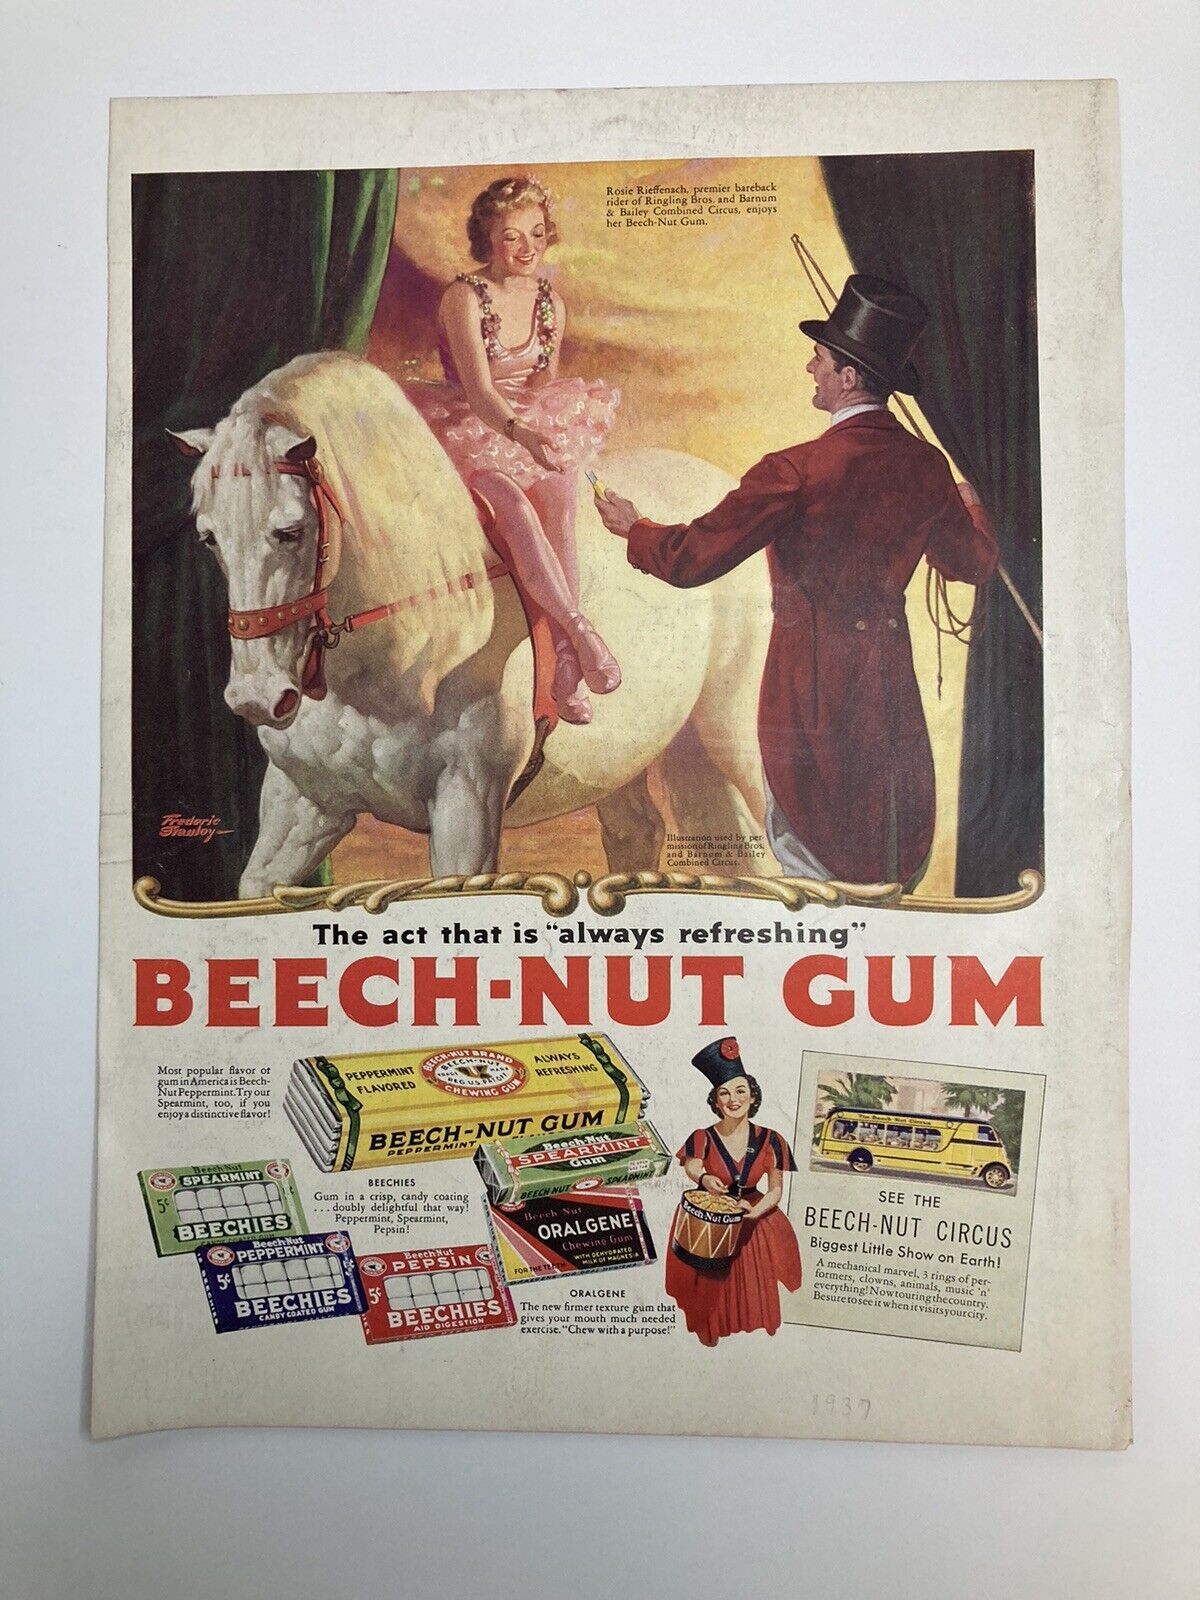 c1930s Print Ad: Beech-Nut Gum - Act That Is Always Refreshing - Addressograph